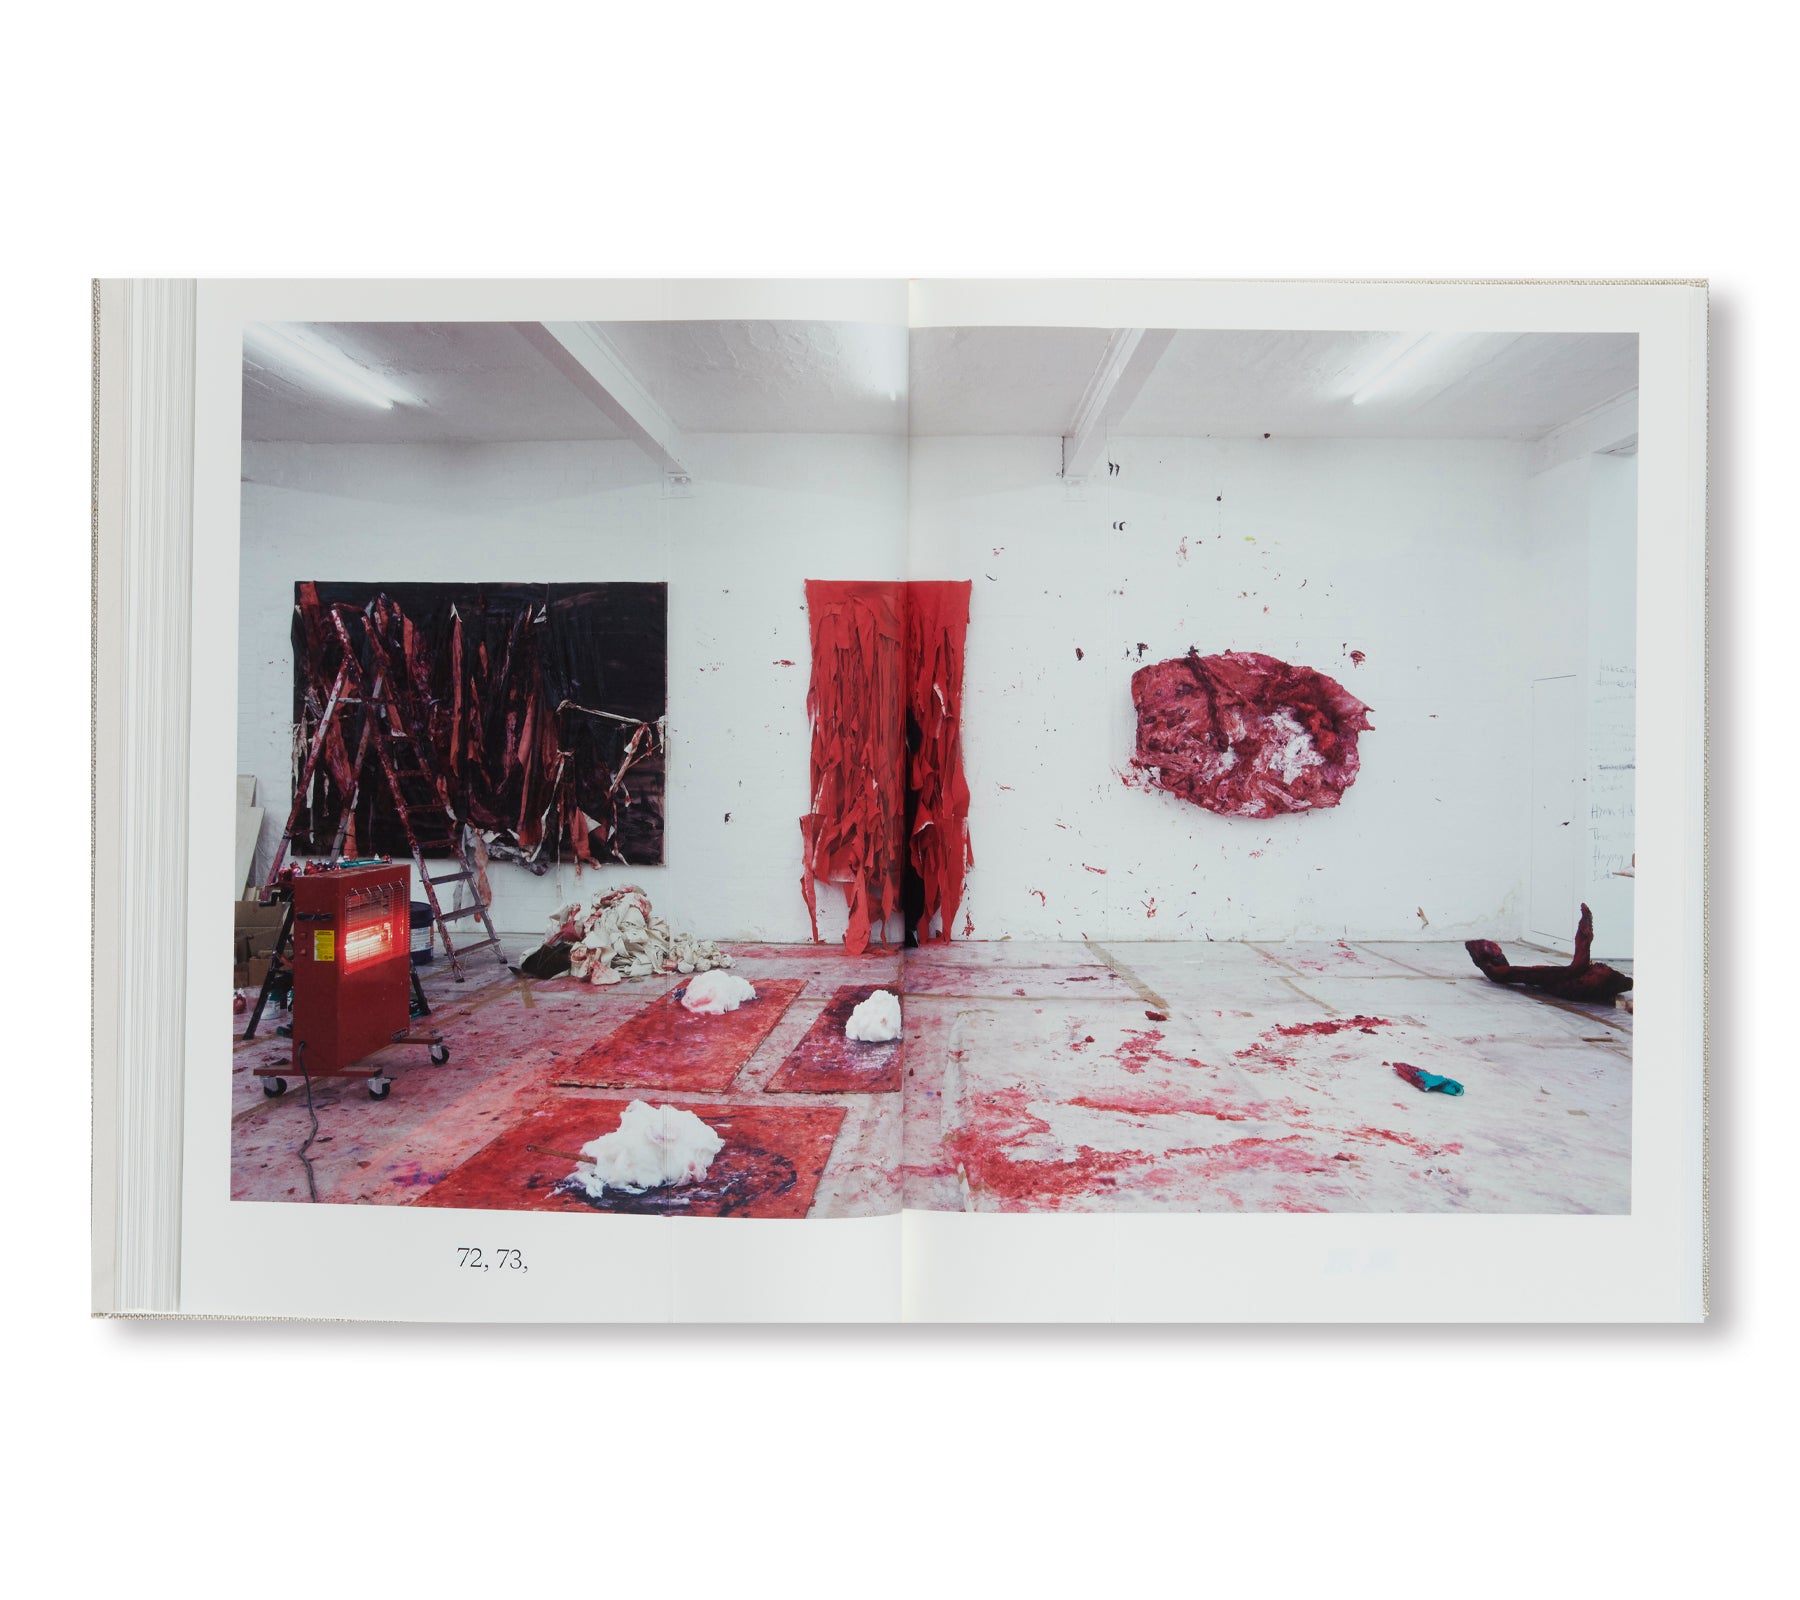 PAINTING by Anish Kapoor